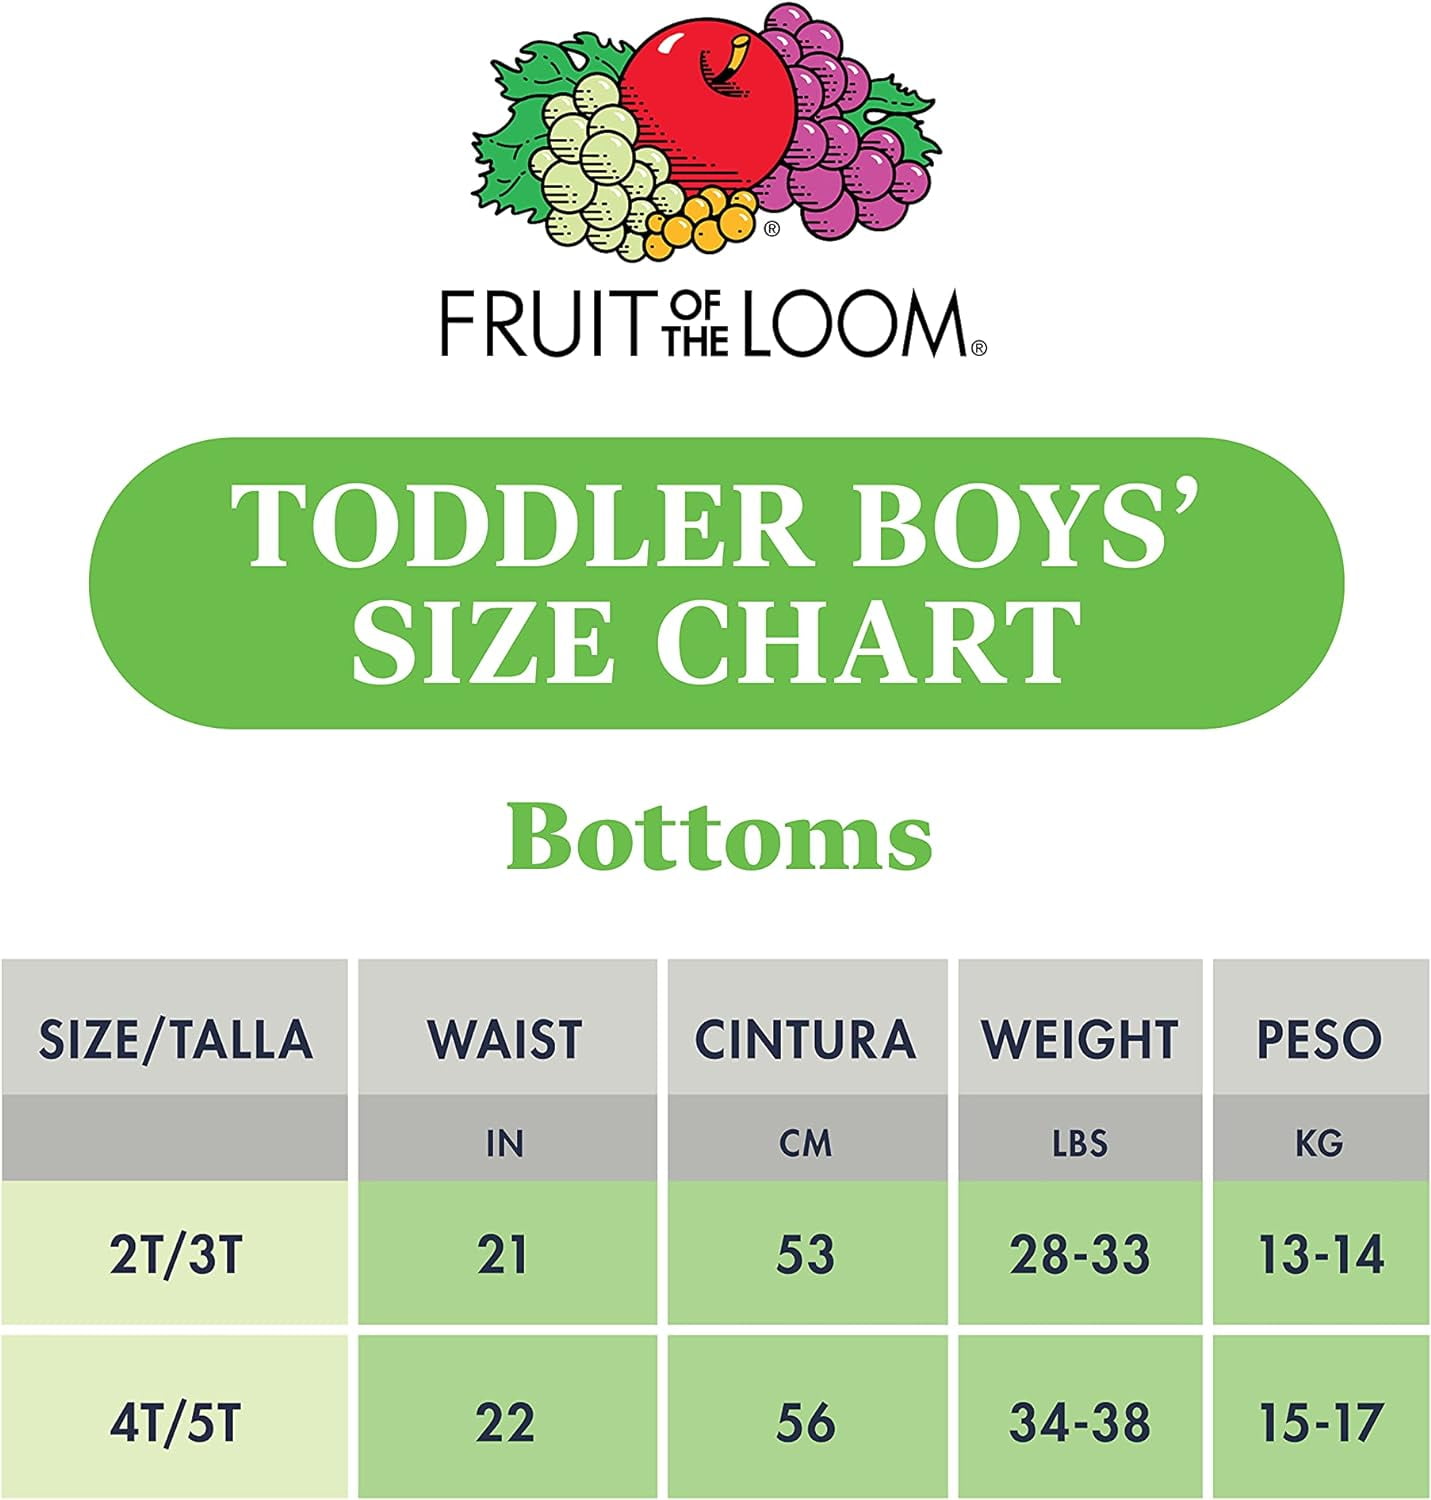 Fruit of the Loom Toddler Boy Cotton Boxer Briefs, 10 Pack 